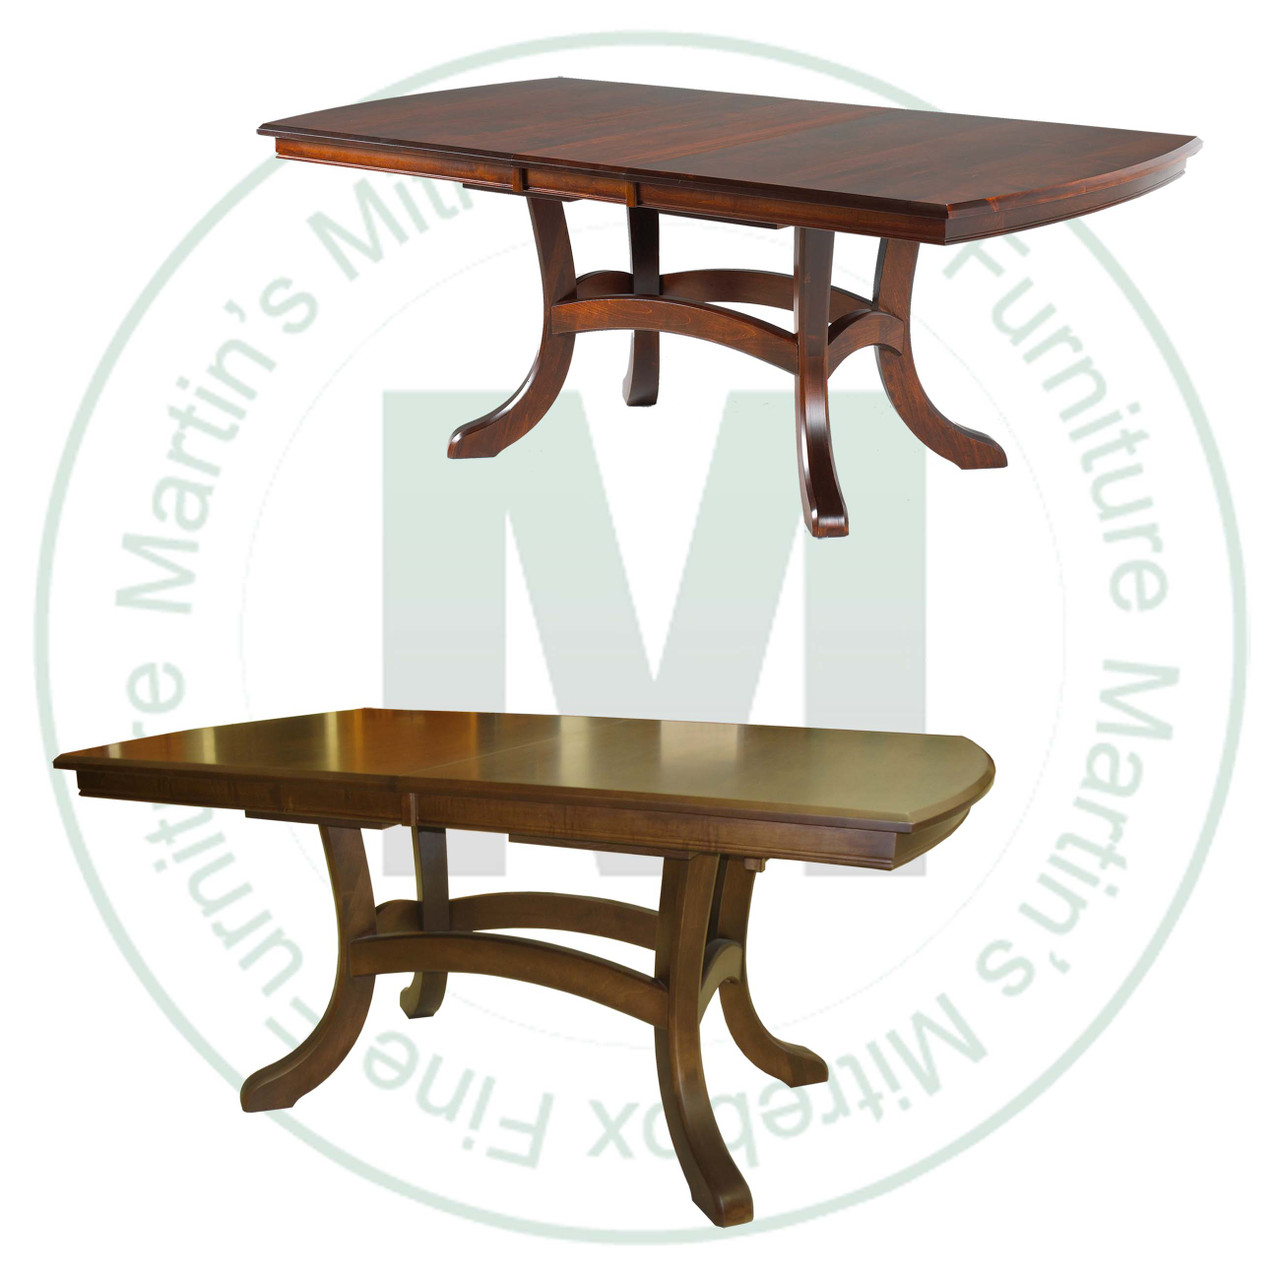 Maple Jordan Double Pedestal Table 48''D x 72''W x 30''H With 2 - 12'' Leaves. Table Has 1.25'' Thick Top